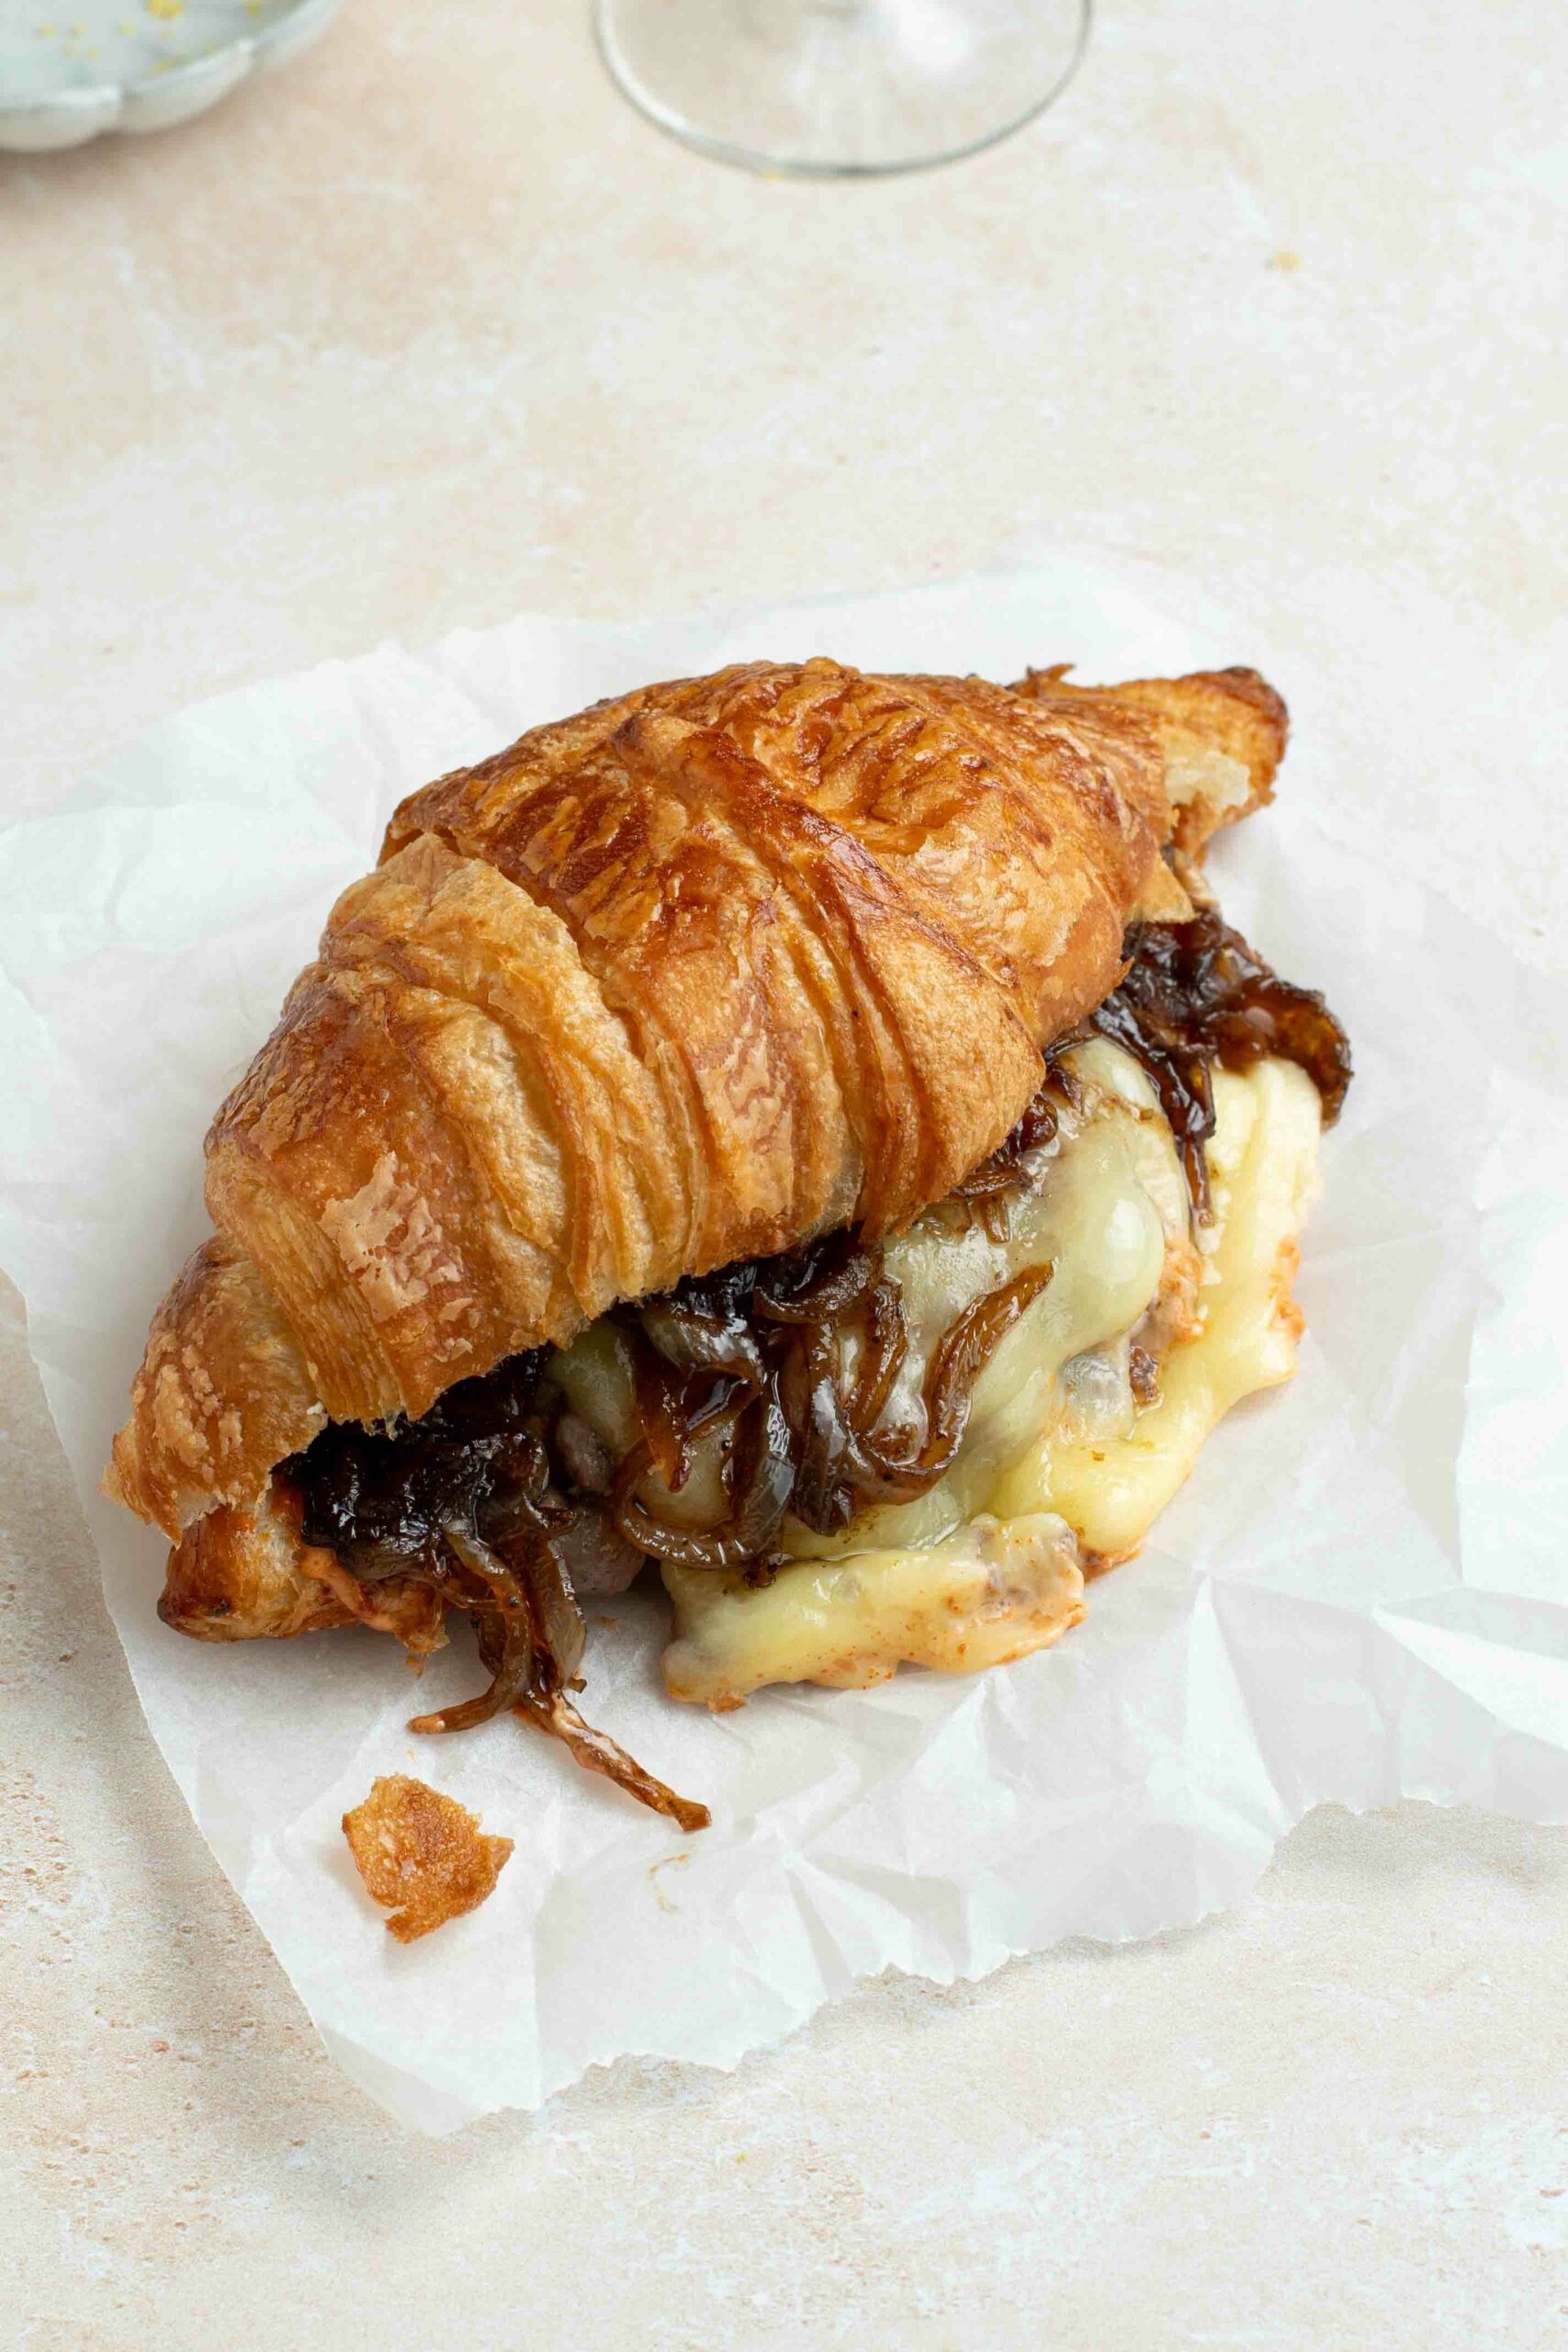 Croissant burger on a sheet of baking paper, with onion confit and runny cheese.